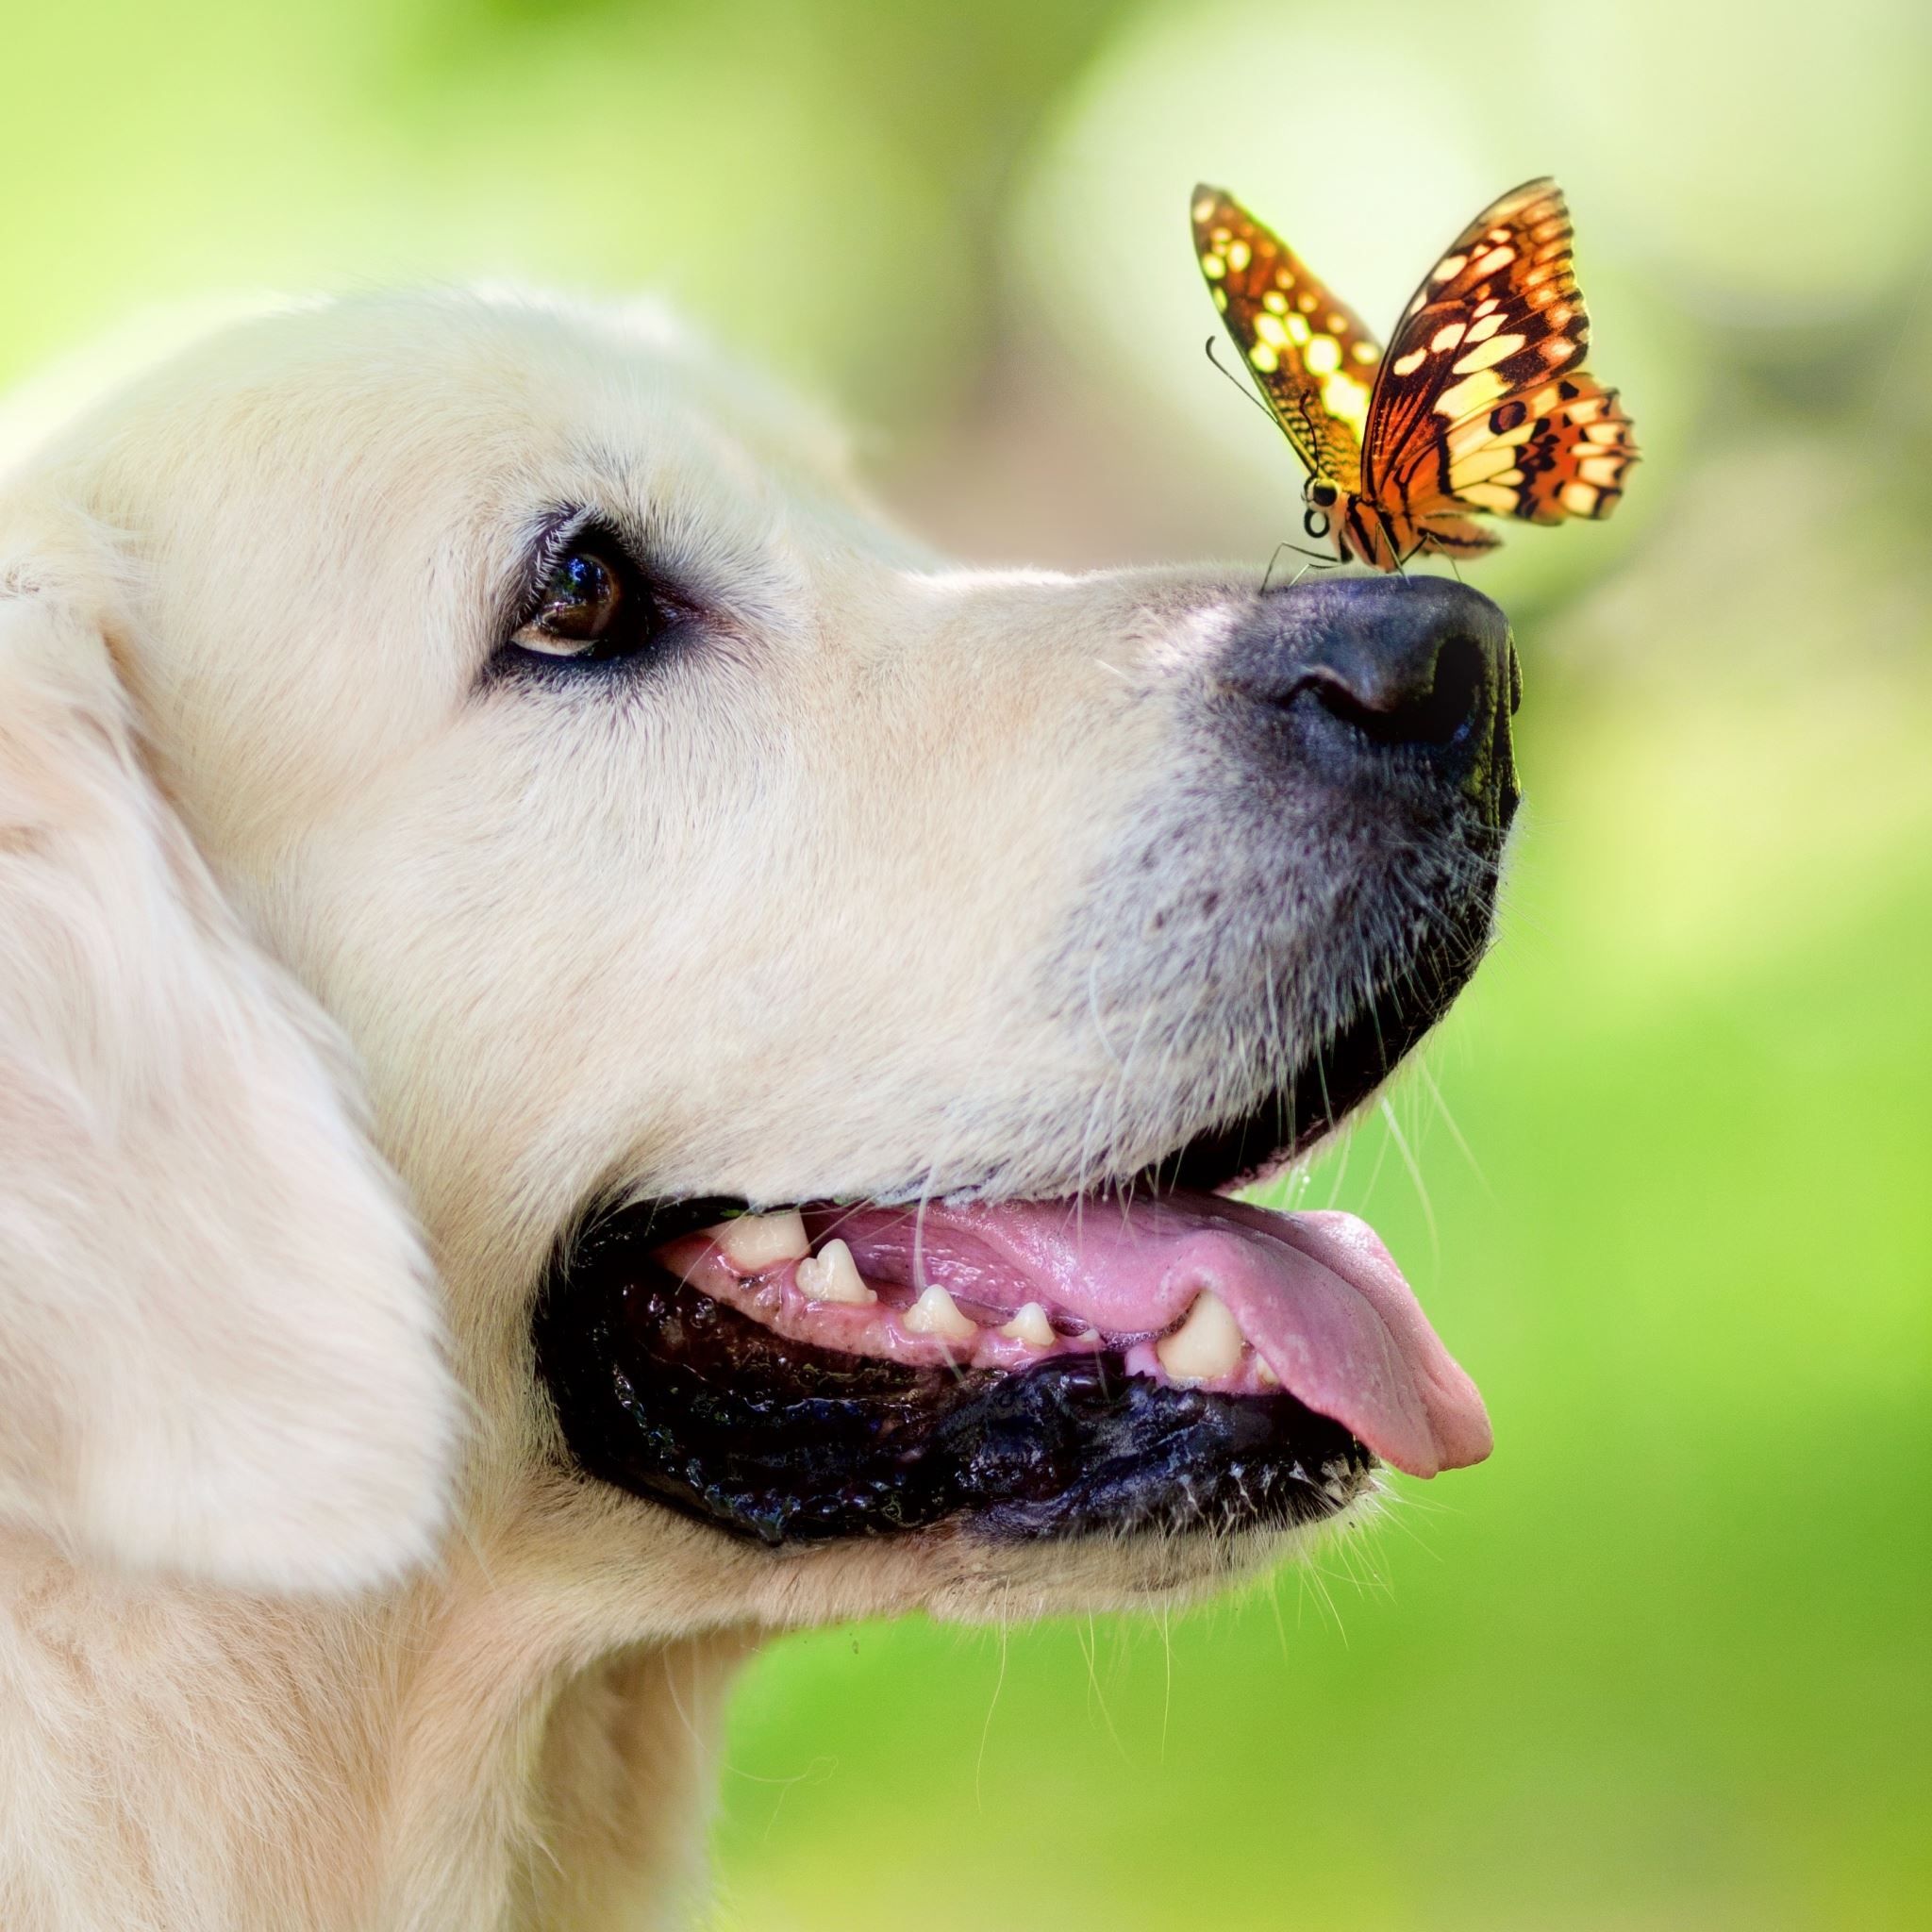 Dog Muzzle Butterfly Tongue Sticking Out Spring Summer iPad Air wallpaper 